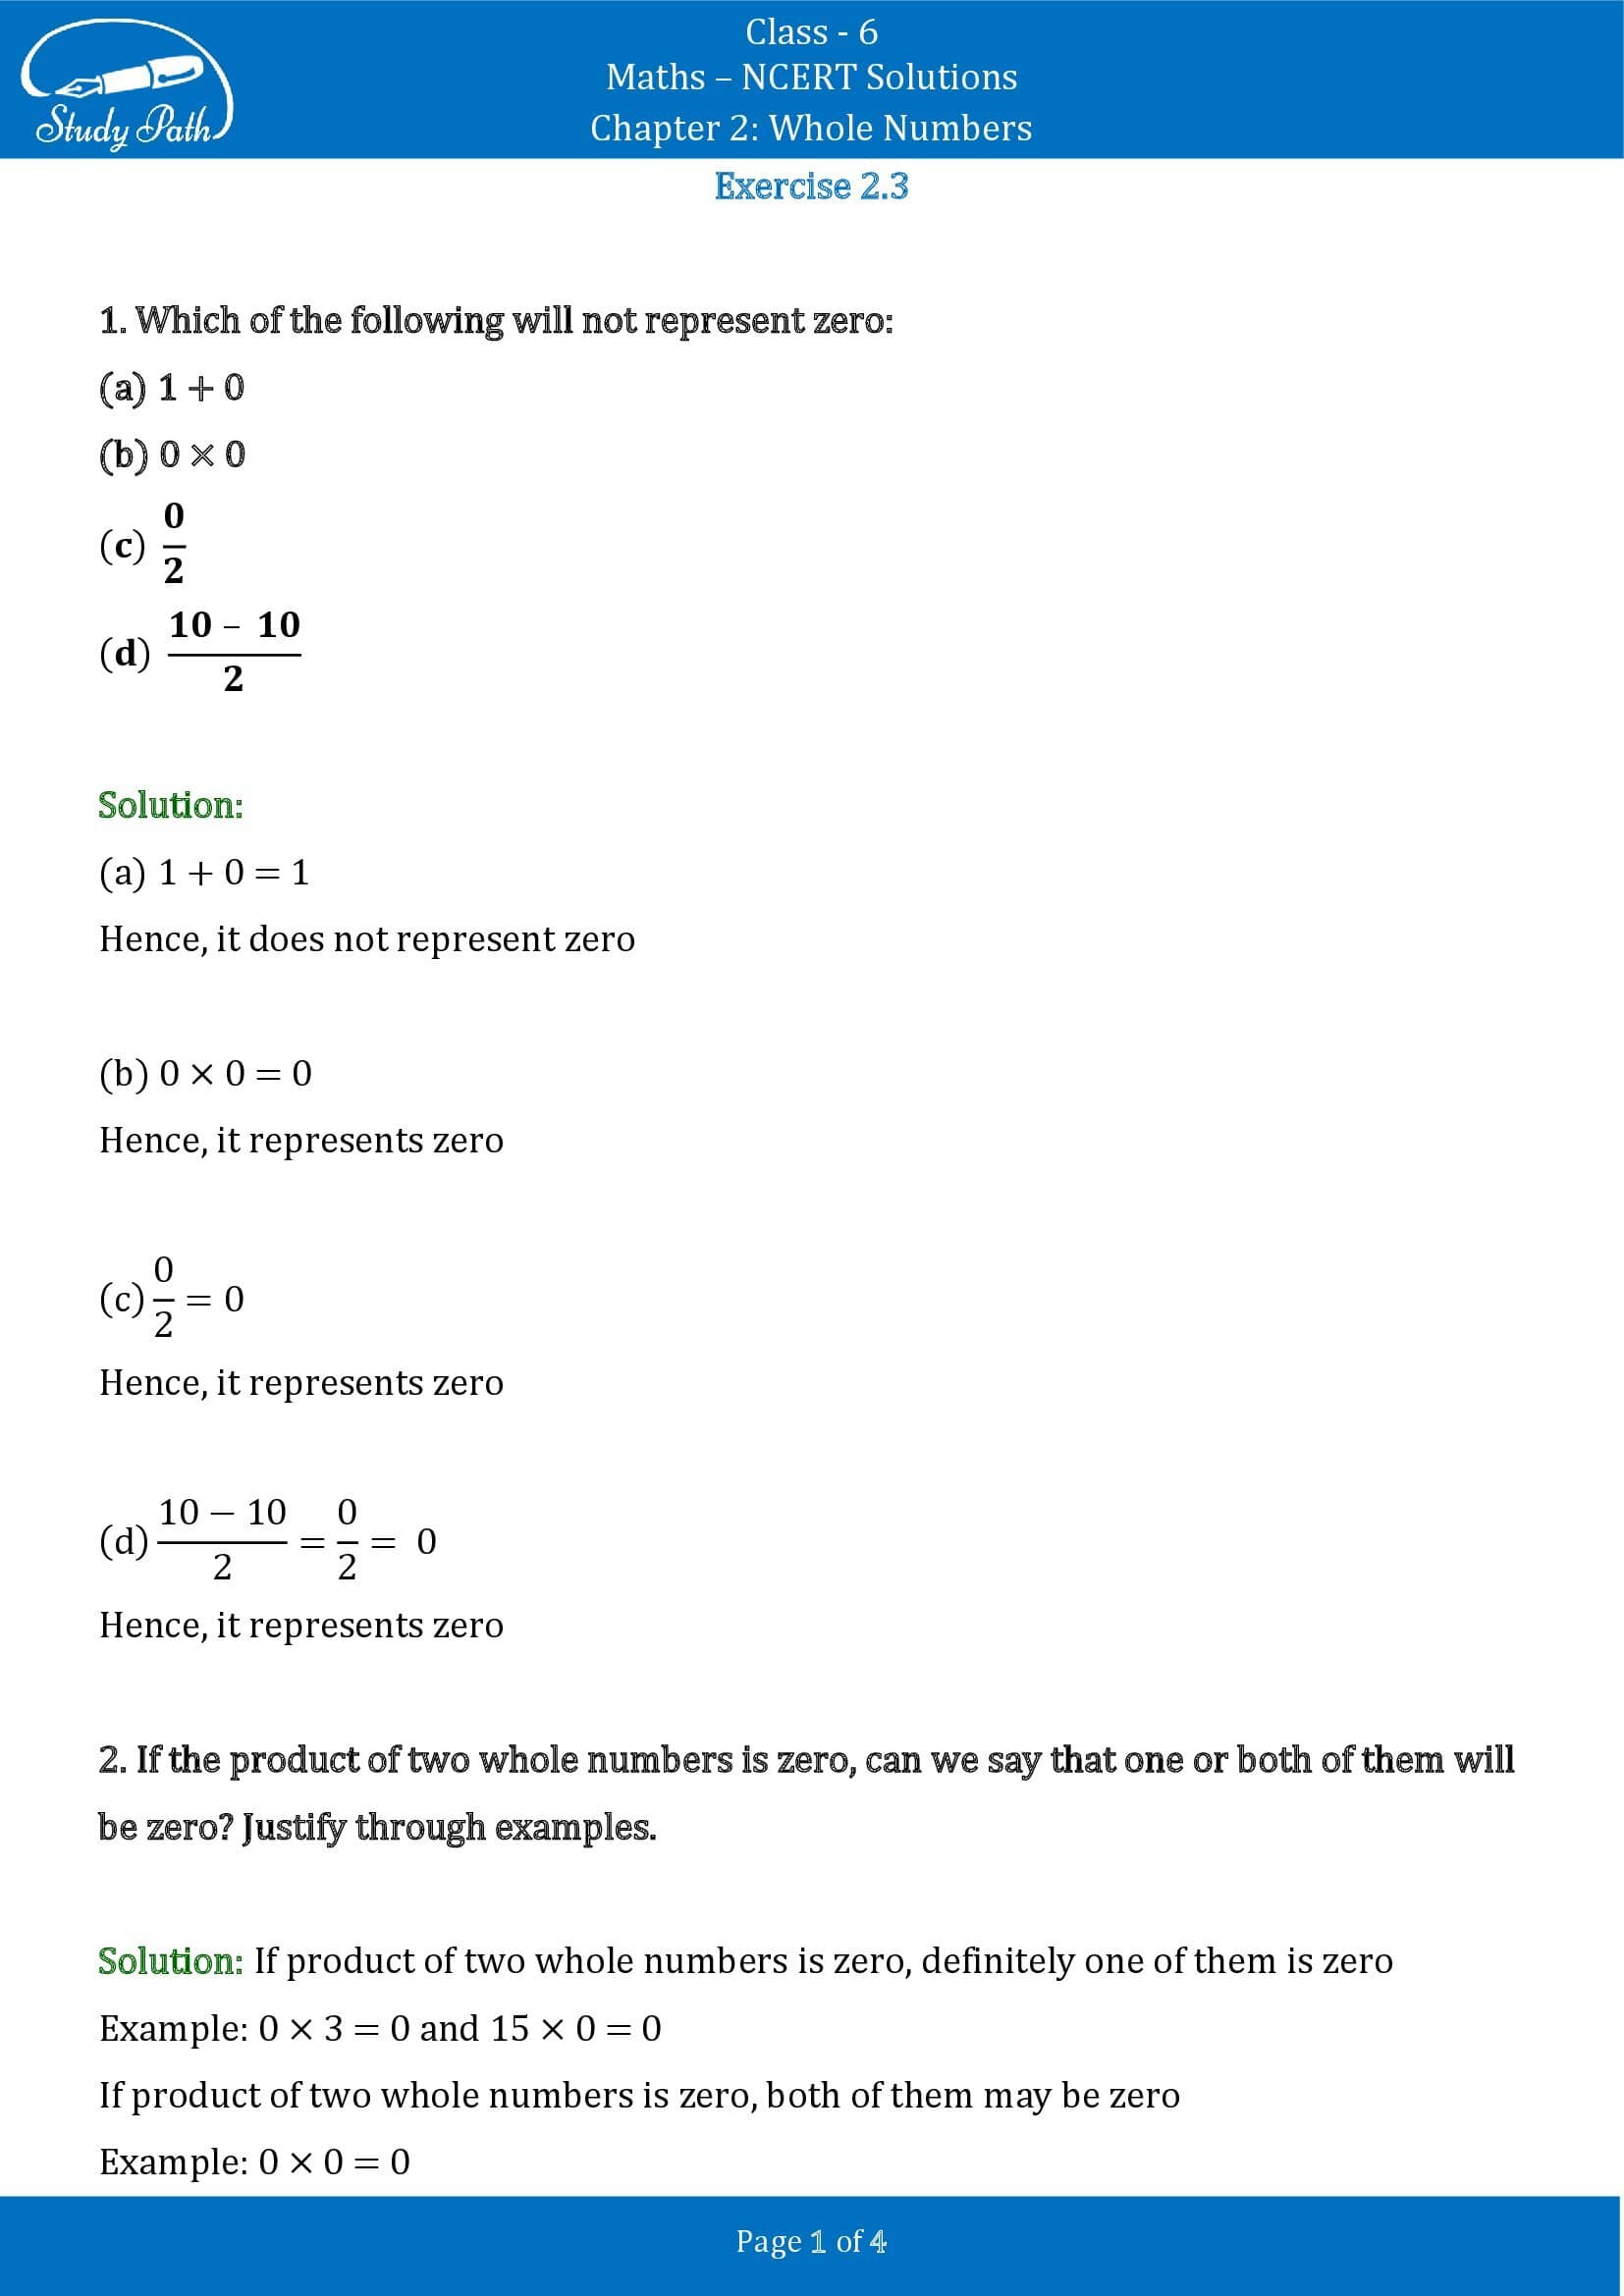 NCERT Solutions for Class 6 Maths Chapter 2 Whole Numbers Exercise 2.3 00001